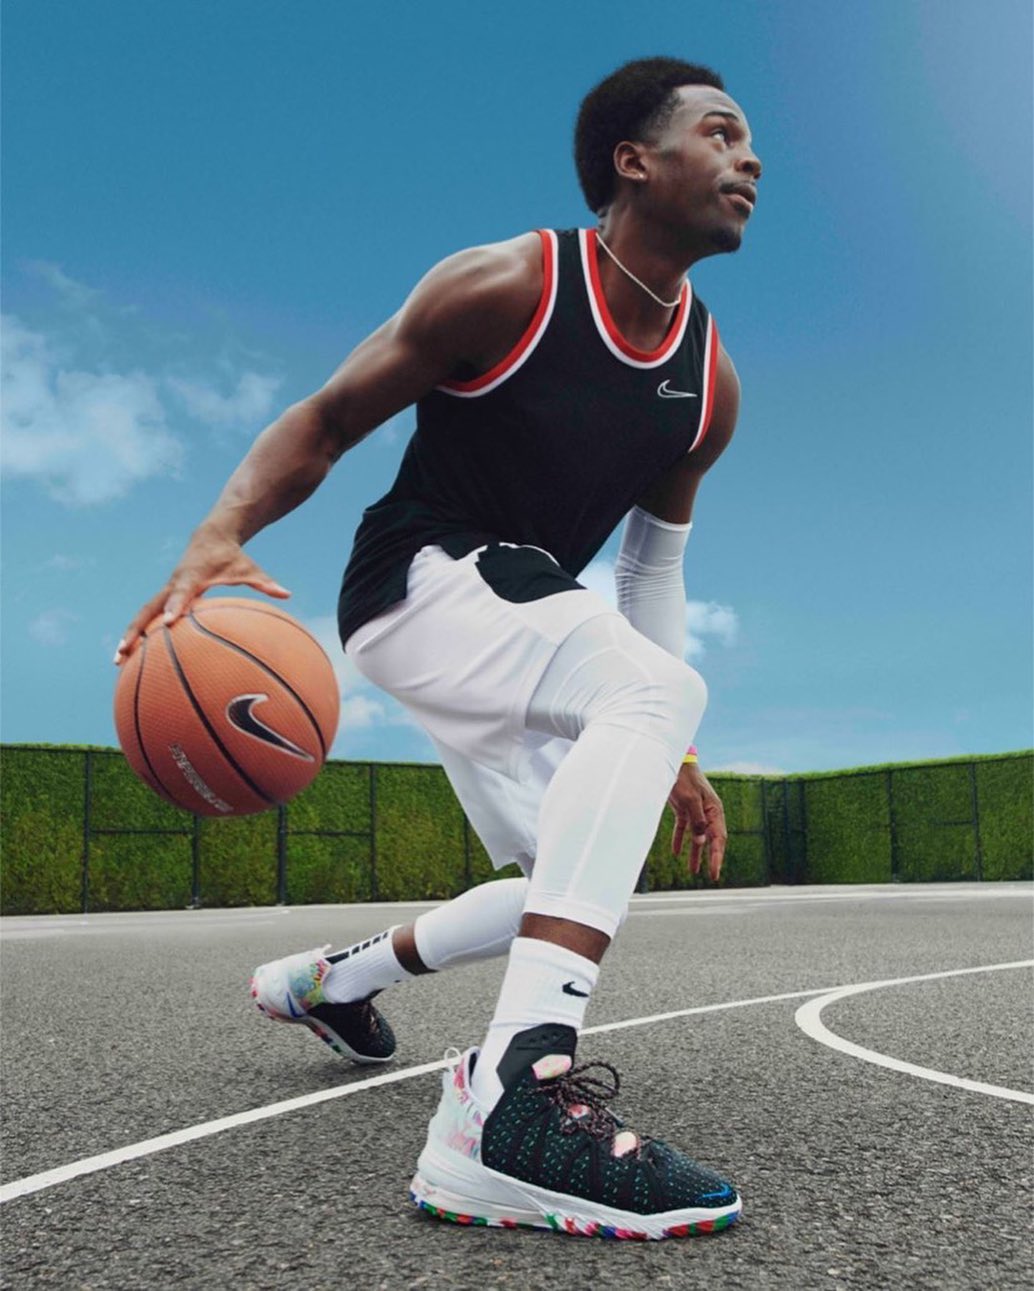 Foot Locker ME - The new LeBron 18 is designed for unstoppable bursts of speed. Drops October 9th! #NikeBasketball @KingJames